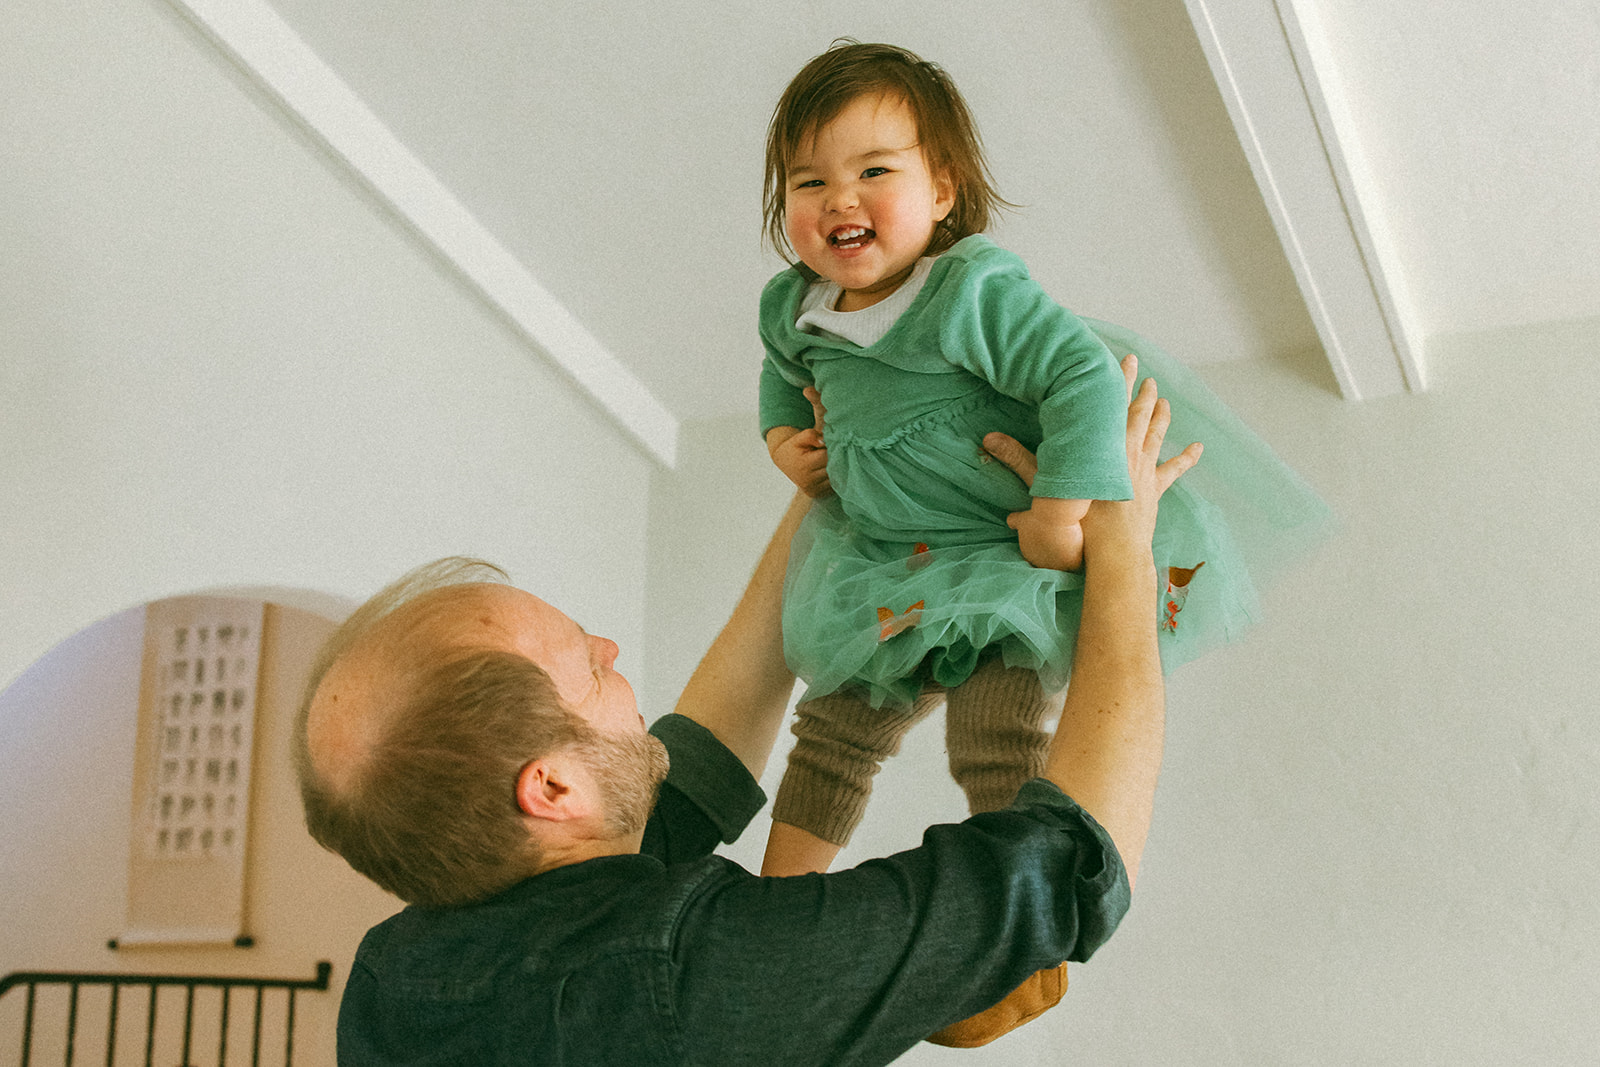 dad throwing adorable baby in the air at home